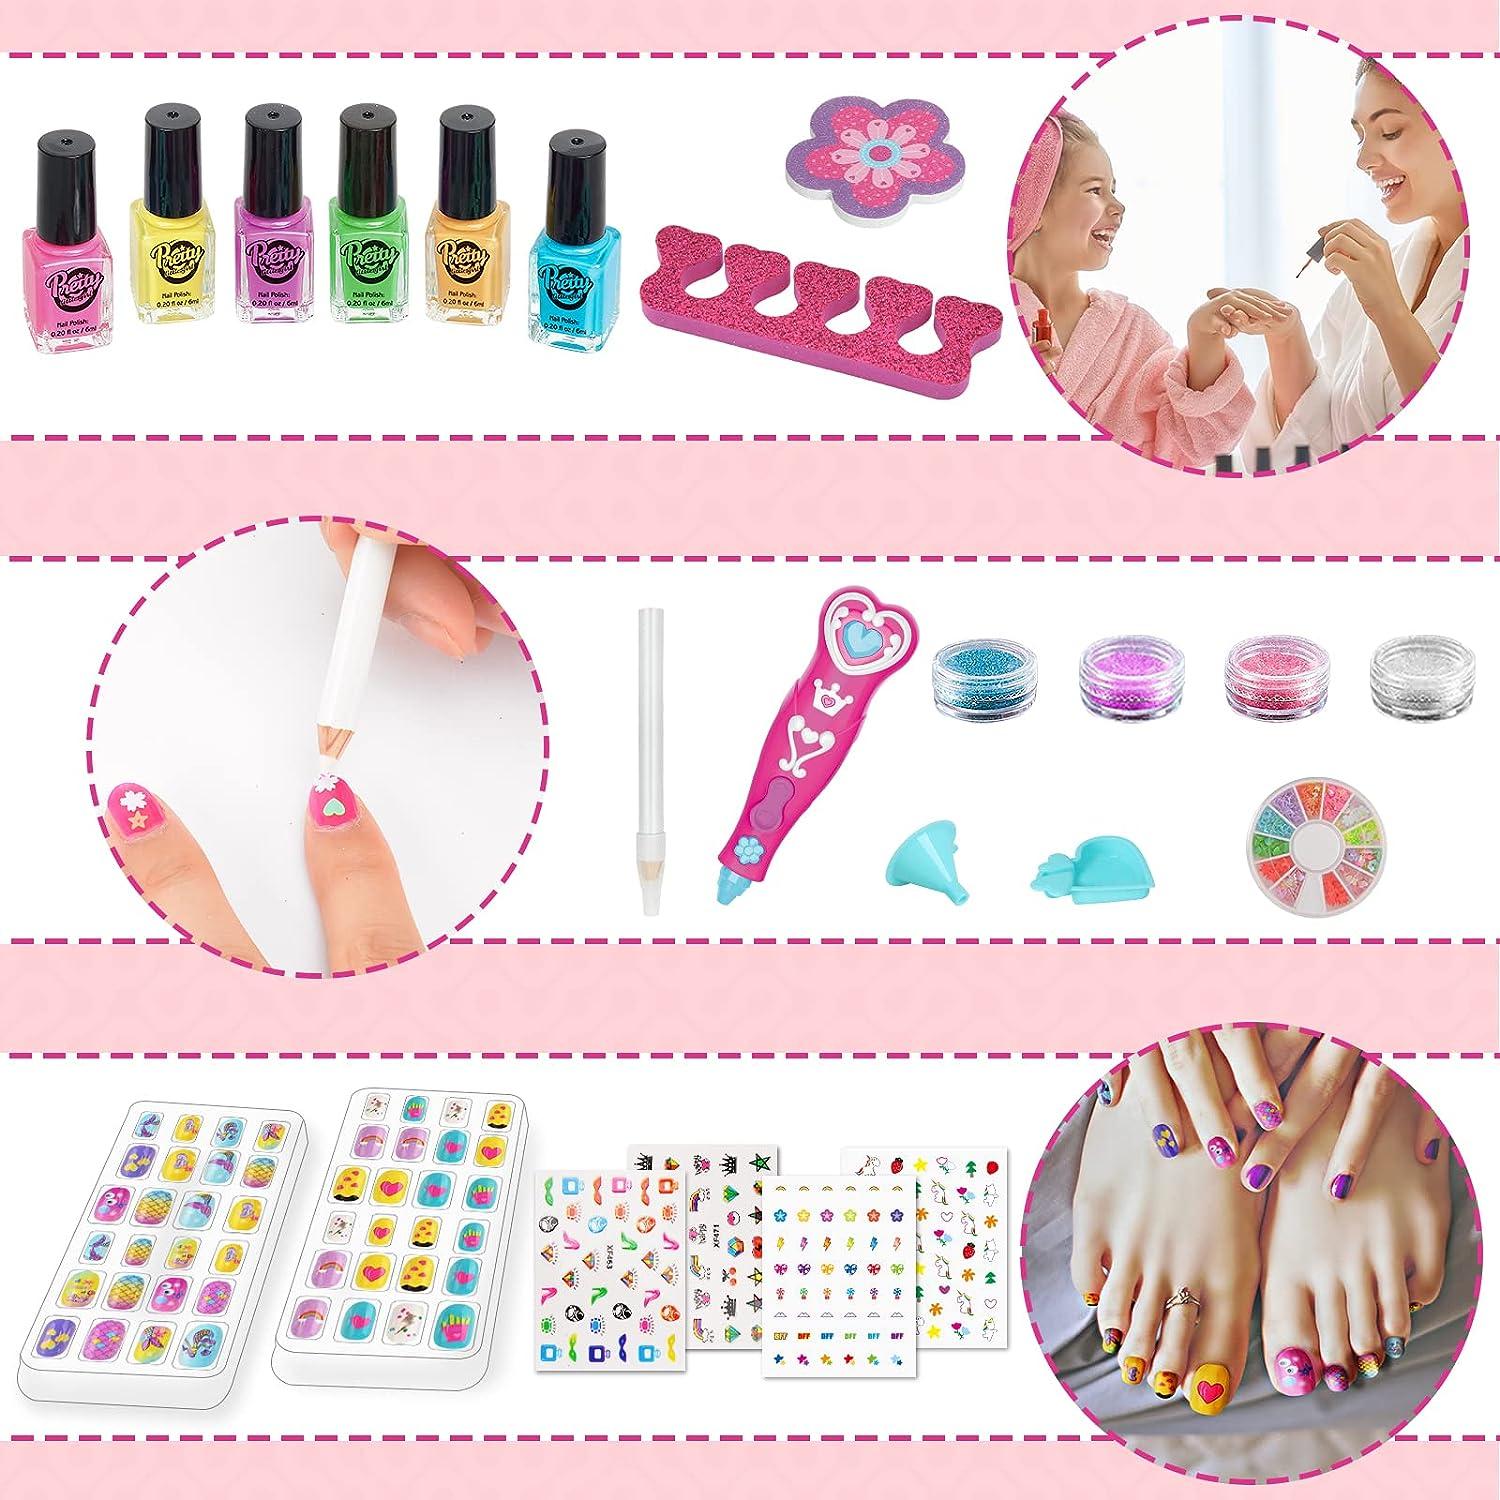 Buy Kids Nail Polish Set for Girls, Nail Art Kit with Nail Dryer & Polish  Pen, Non-Toxic Peel-Off Quick Dry Nail Polish for Kids, Birthday Christmas  Gift for Kids Ages 6-12 Online